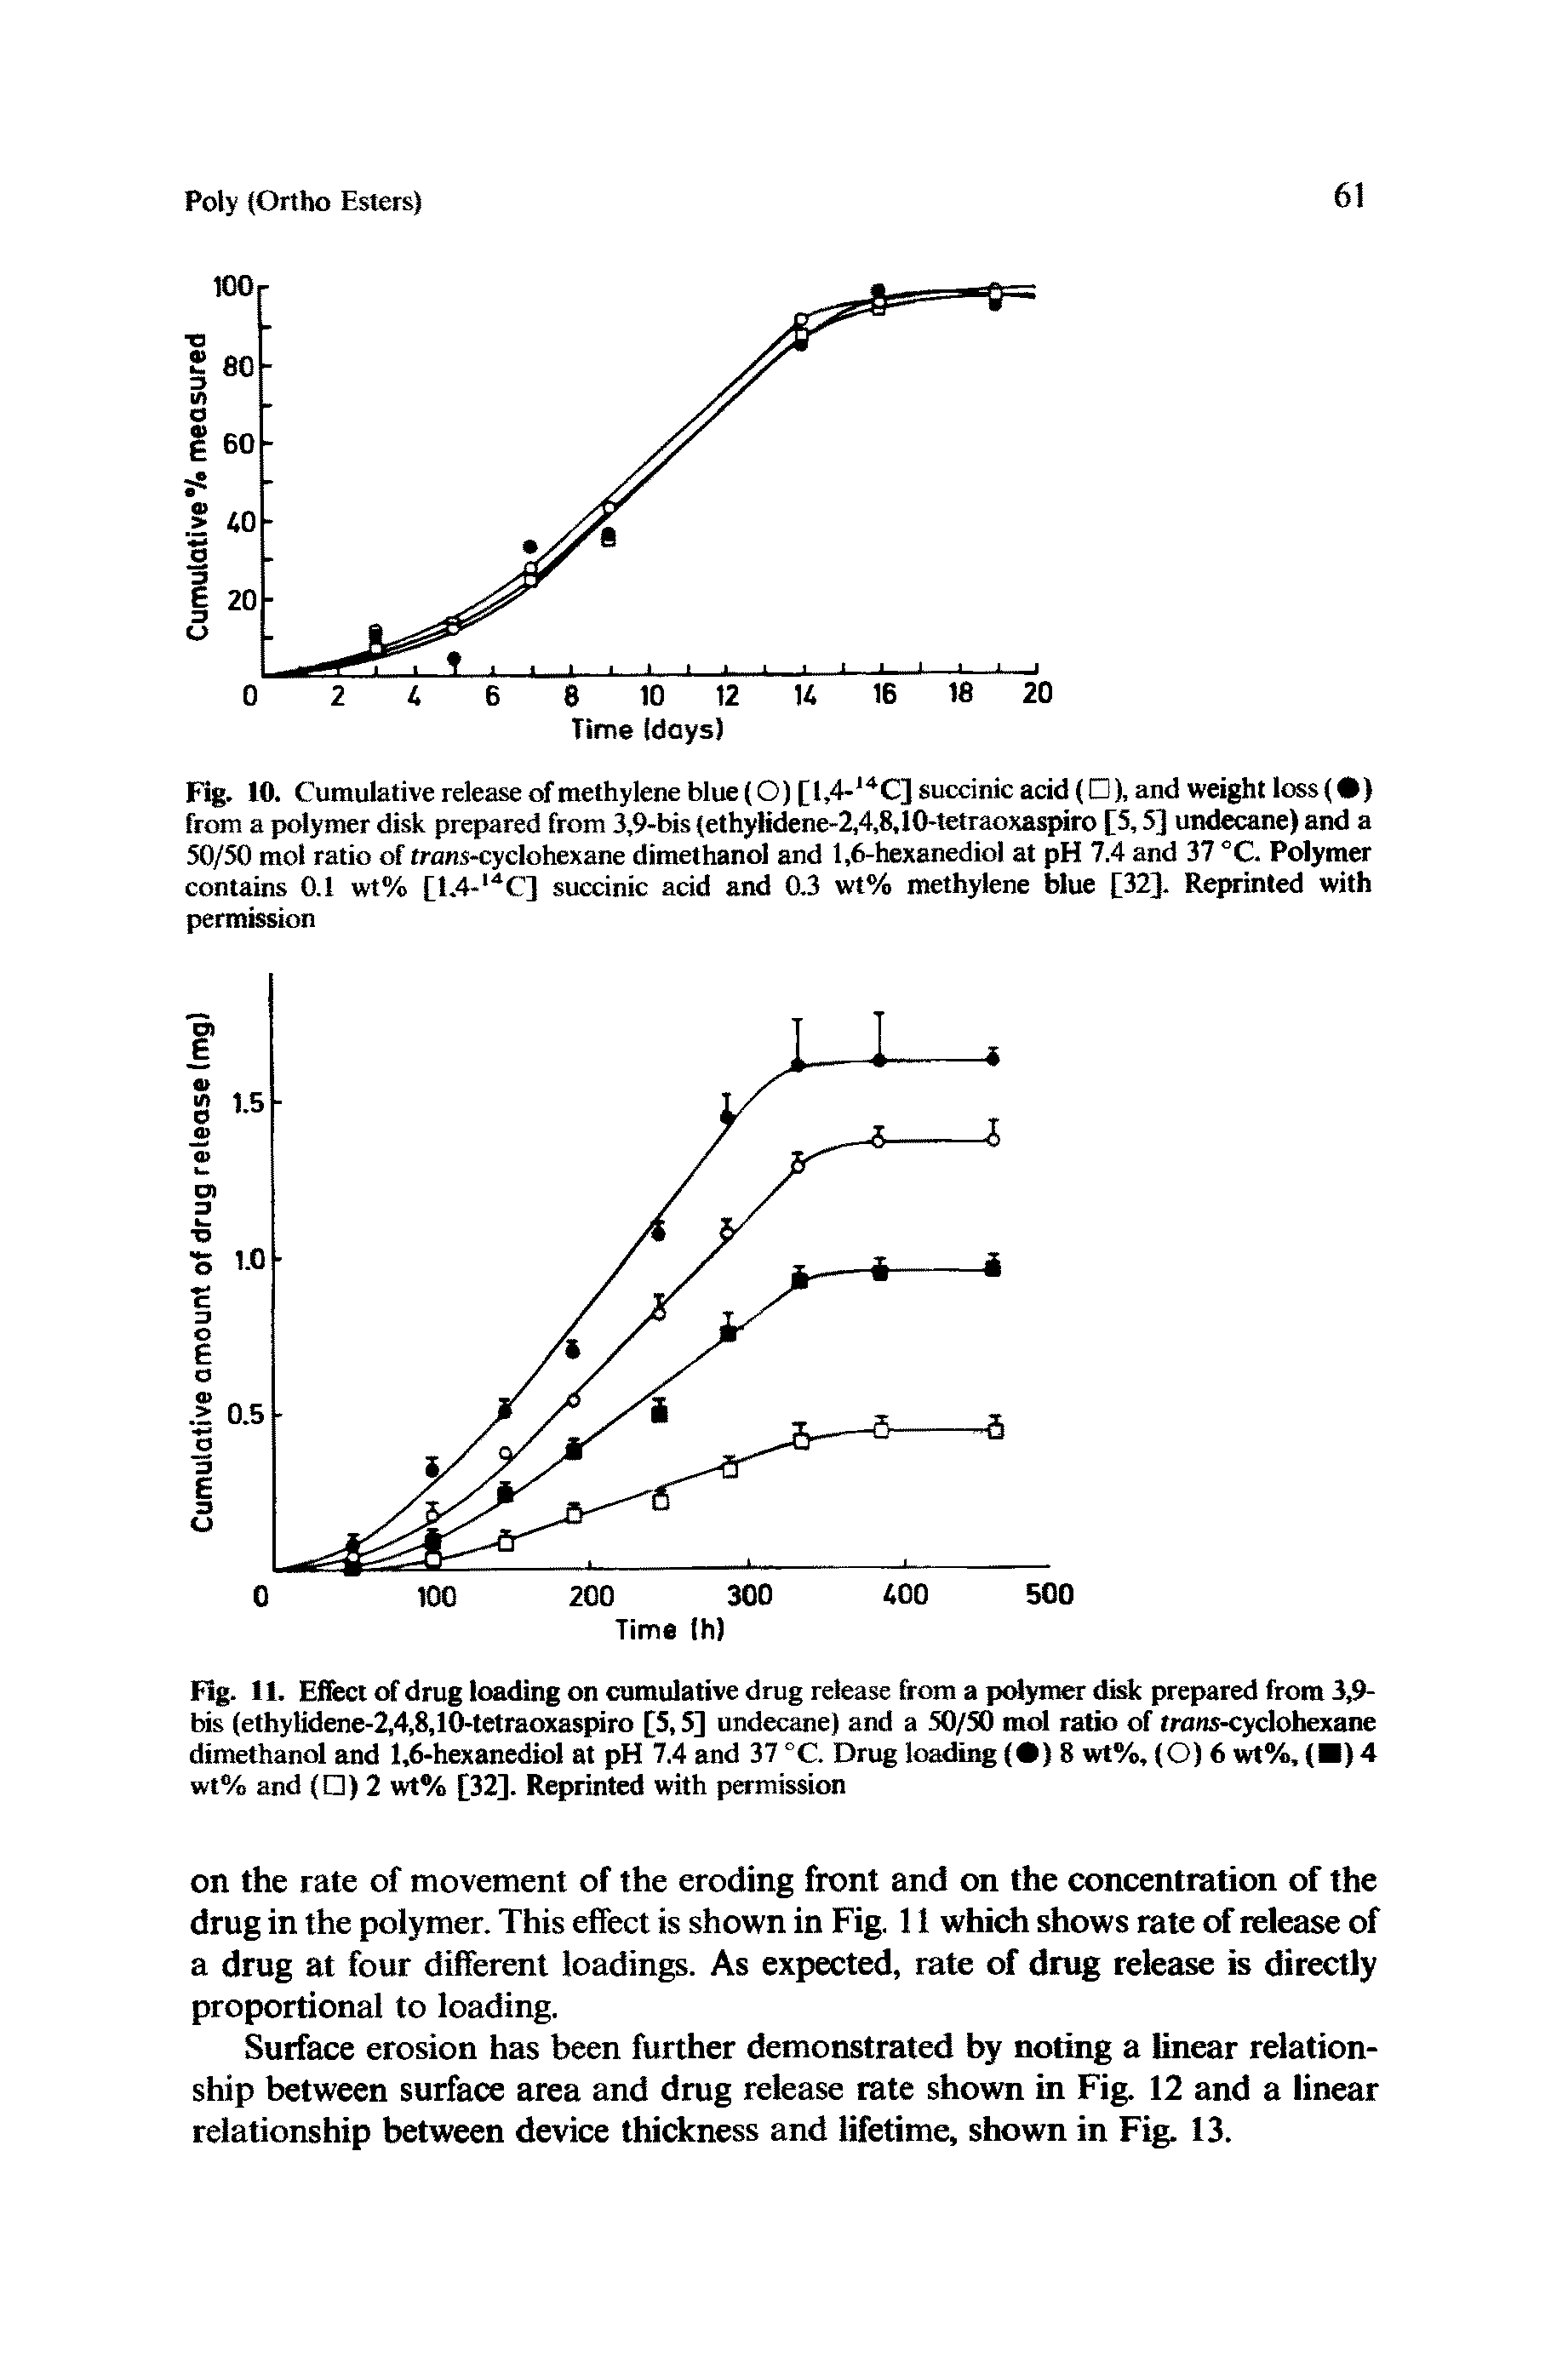 Fig. 11. Effect of drug loading on cumulative drug release from a polymer disk prepared from 3,9-bis (ethylidene-2,4,8,10-tetraoxaspiro [5,5] undecane) and a 50/50 mol ratio of trans-cyclohexane dimethanol and 1,6-hexanediol at pH 7.4 and 37 °C. Drug loading ( ) 8 wt%, (O) 6 wt%, ( ) 4 wt% and ( ) 2 wt% [32]. Reprinted with permission...